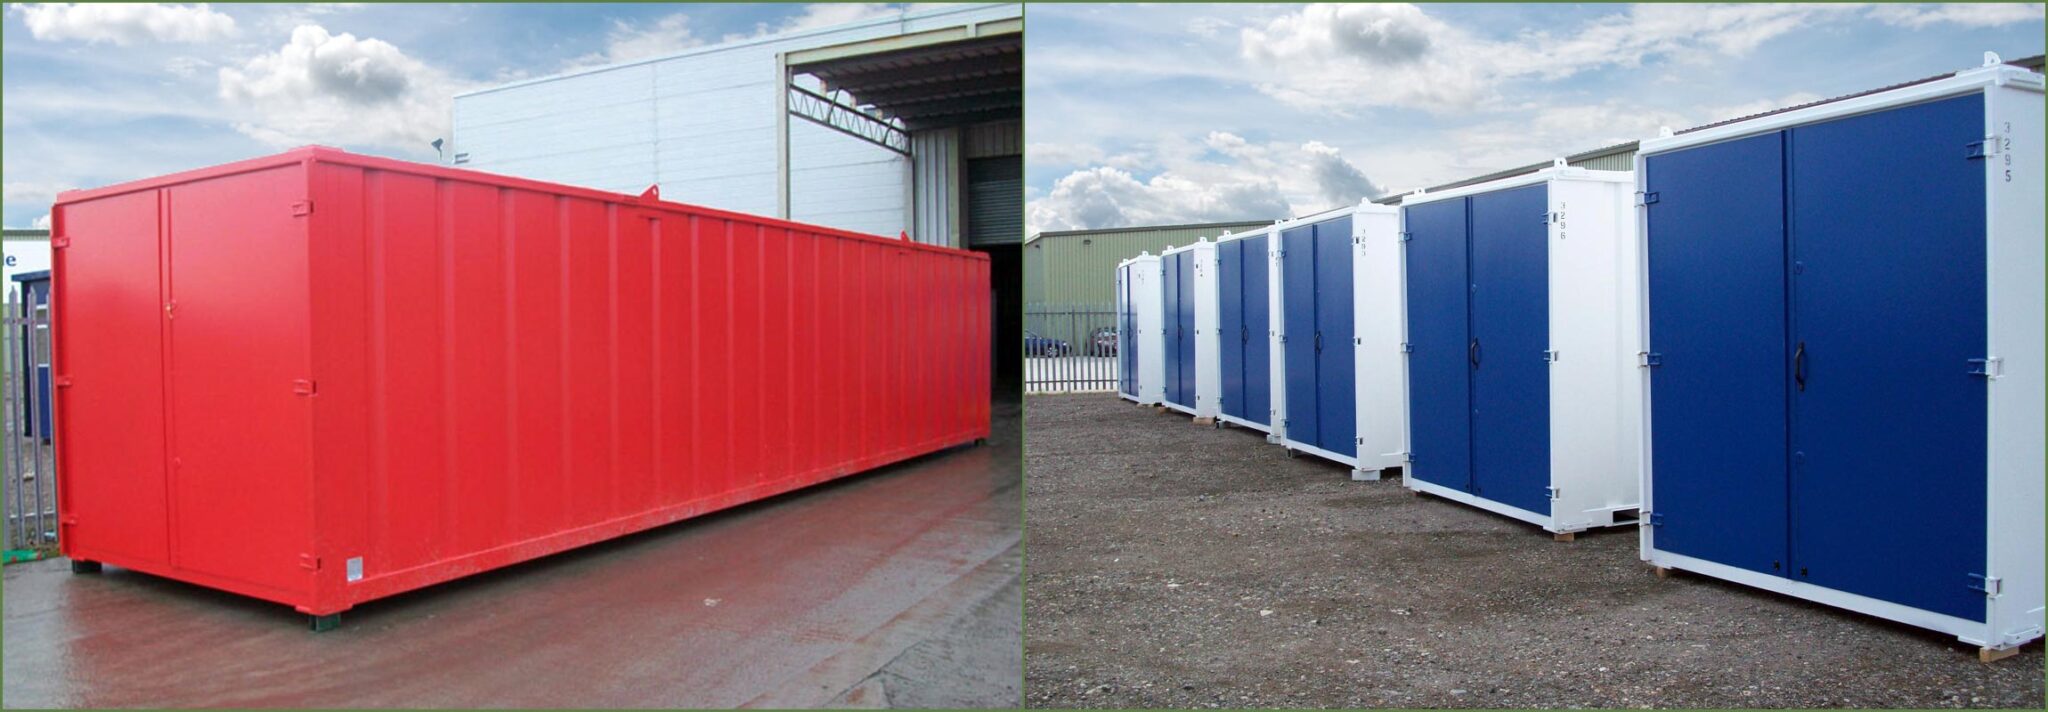 UK Providers of Steel Container Storage Solutions